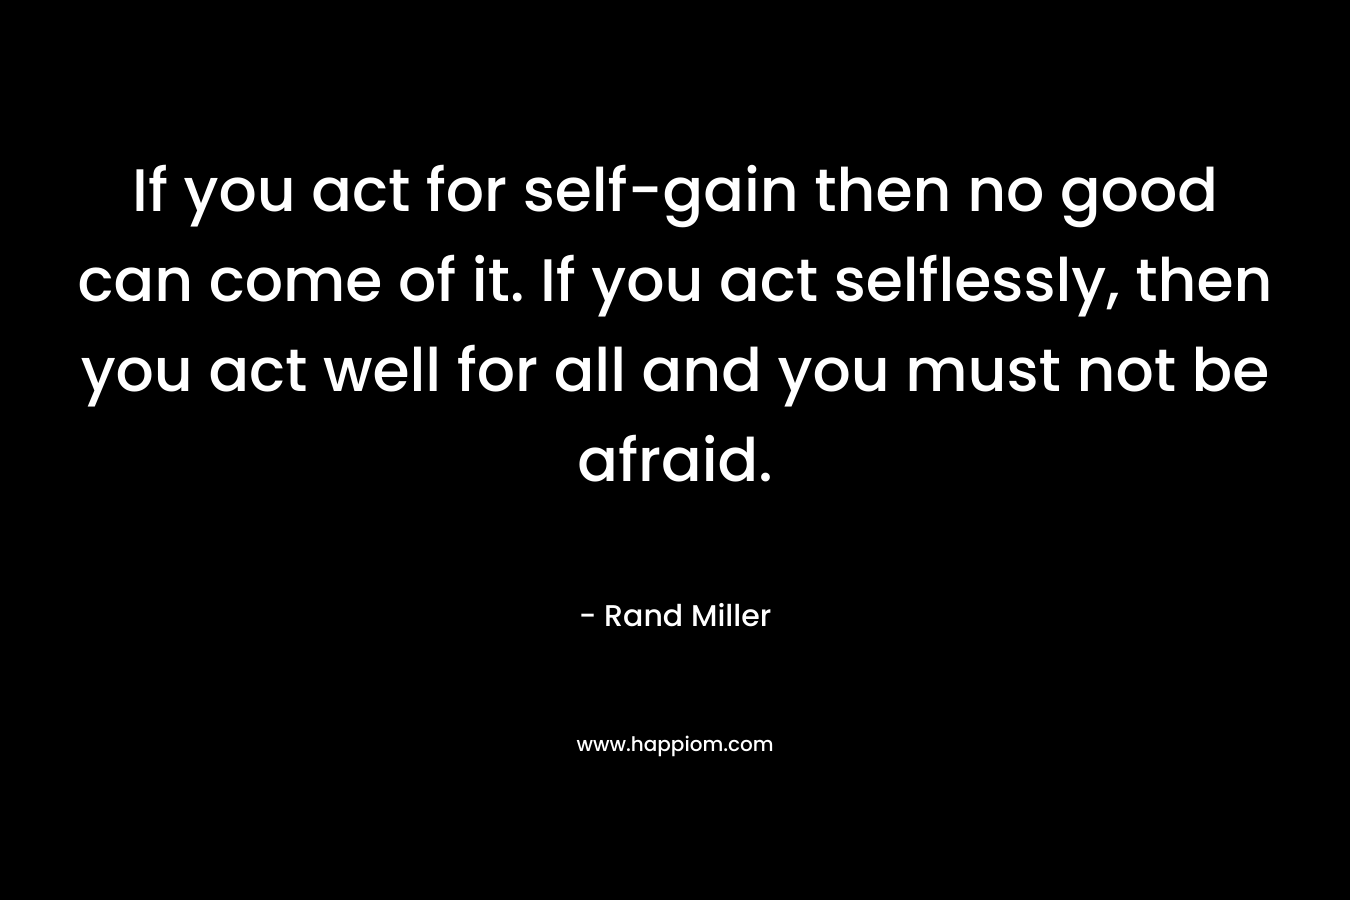 If you act for self-gain then no good can come of it. If you act selflessly, then you act well for all and you must not be afraid.